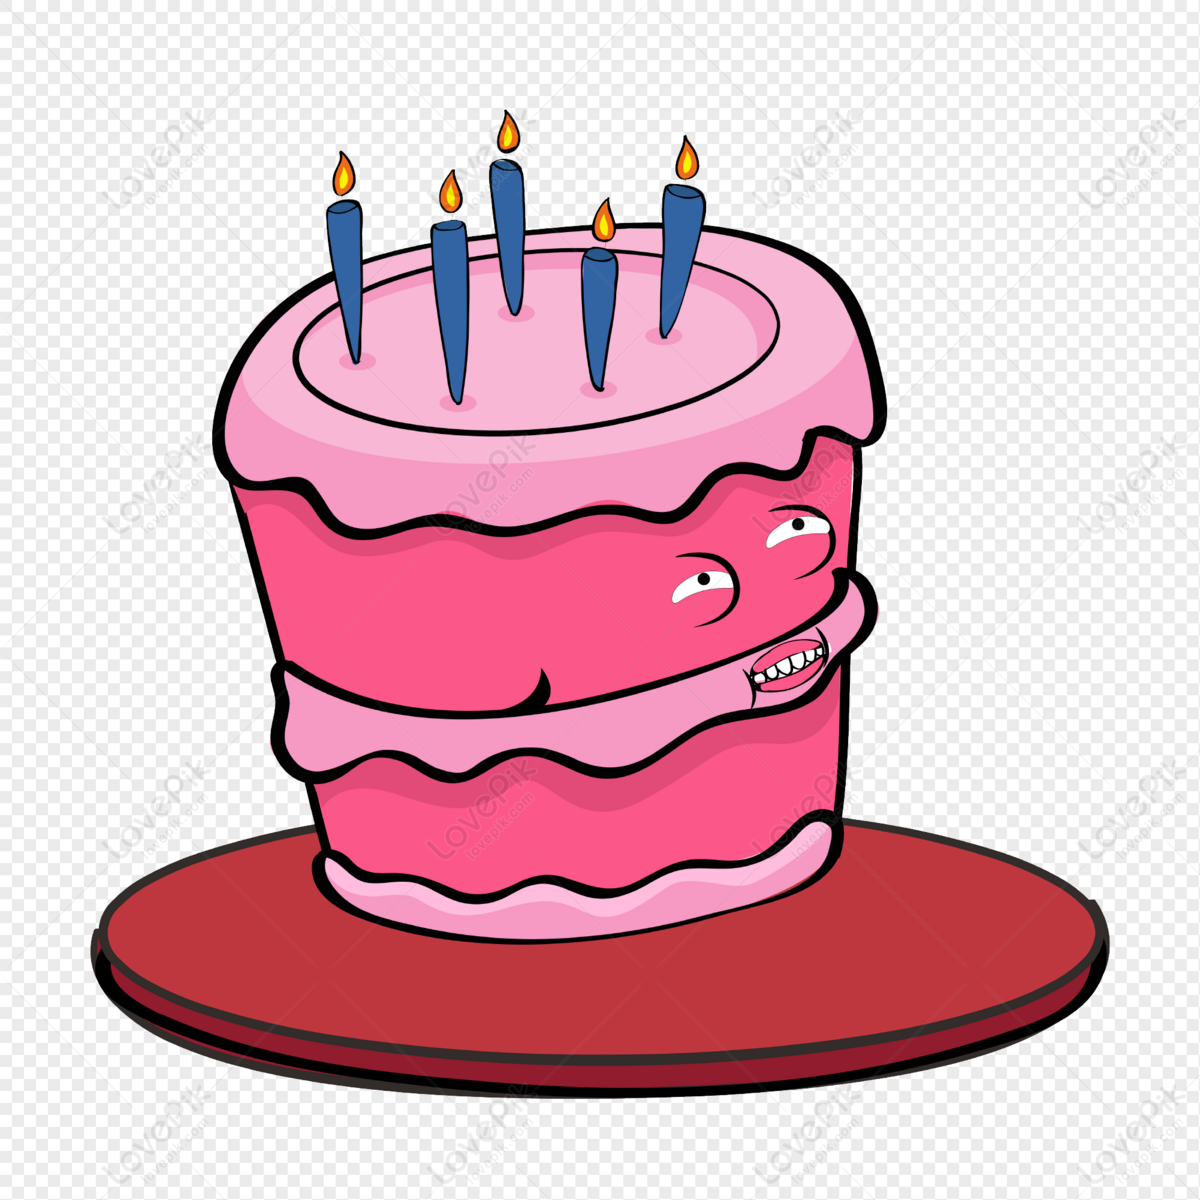 Birthday Cake Free PNG And Clipart Image For Free Download - Lovepik |  401707869